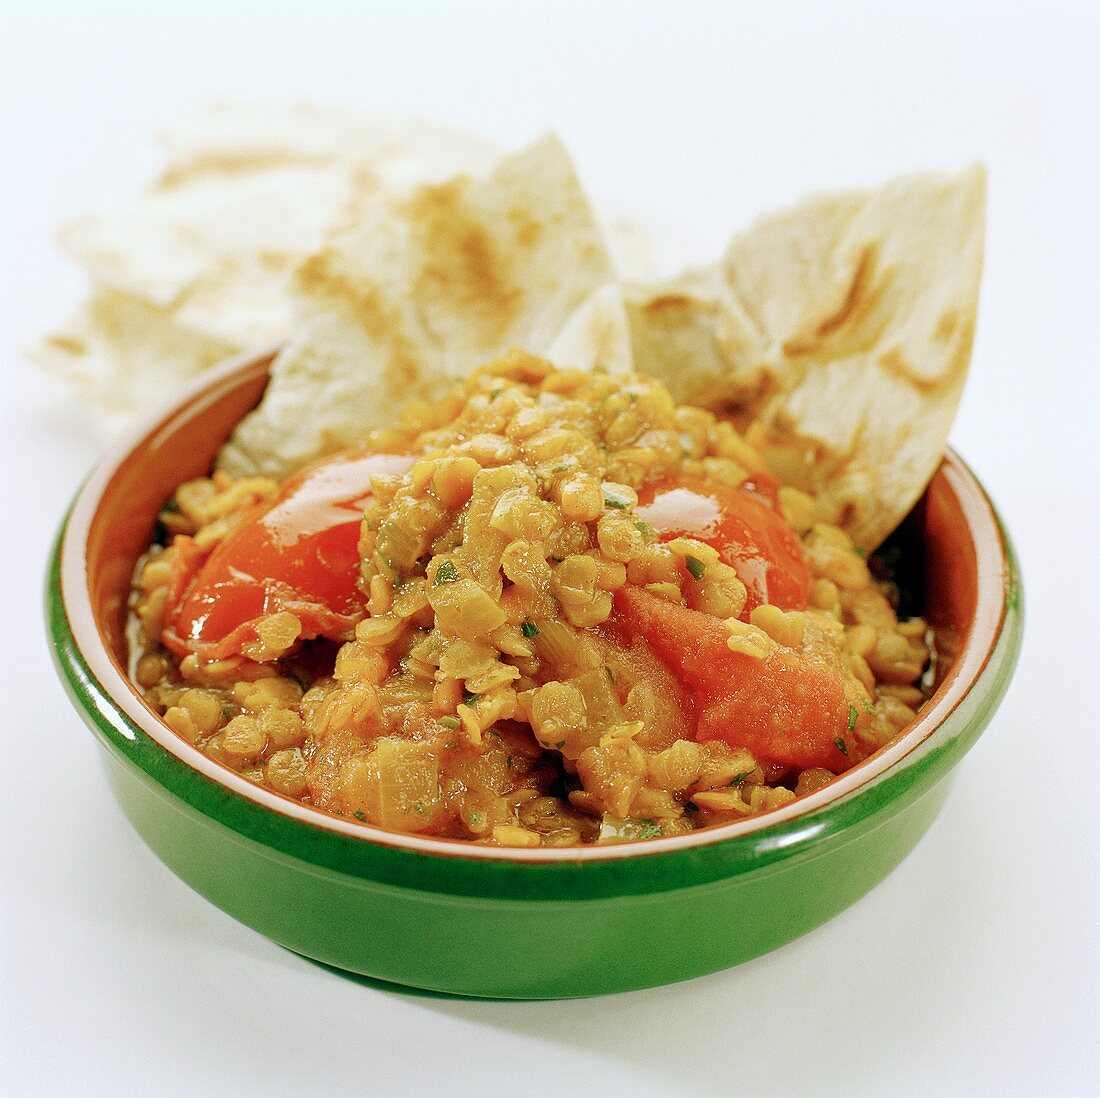 Beans with lentils, tomatoes and flatbread